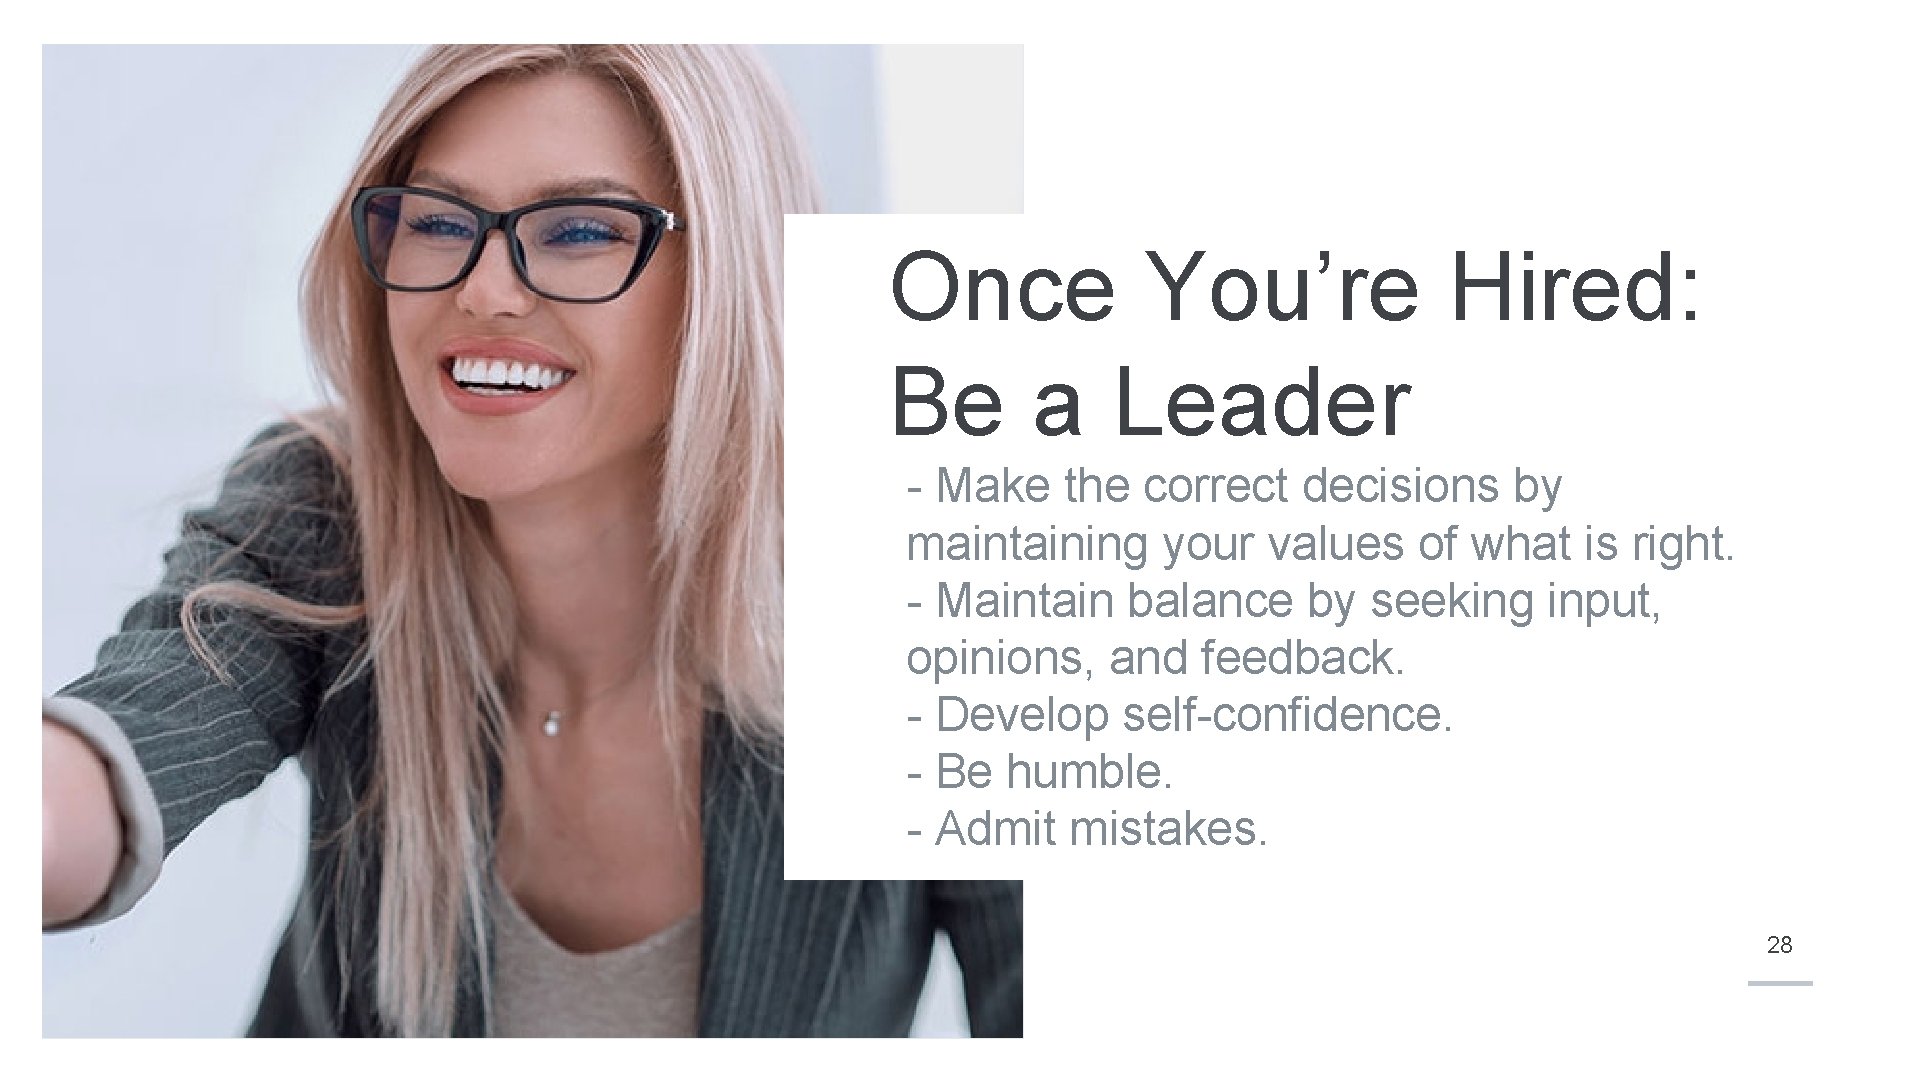 Once You’re Hired: Be a Leader - Make the correct decisions by maintaining your